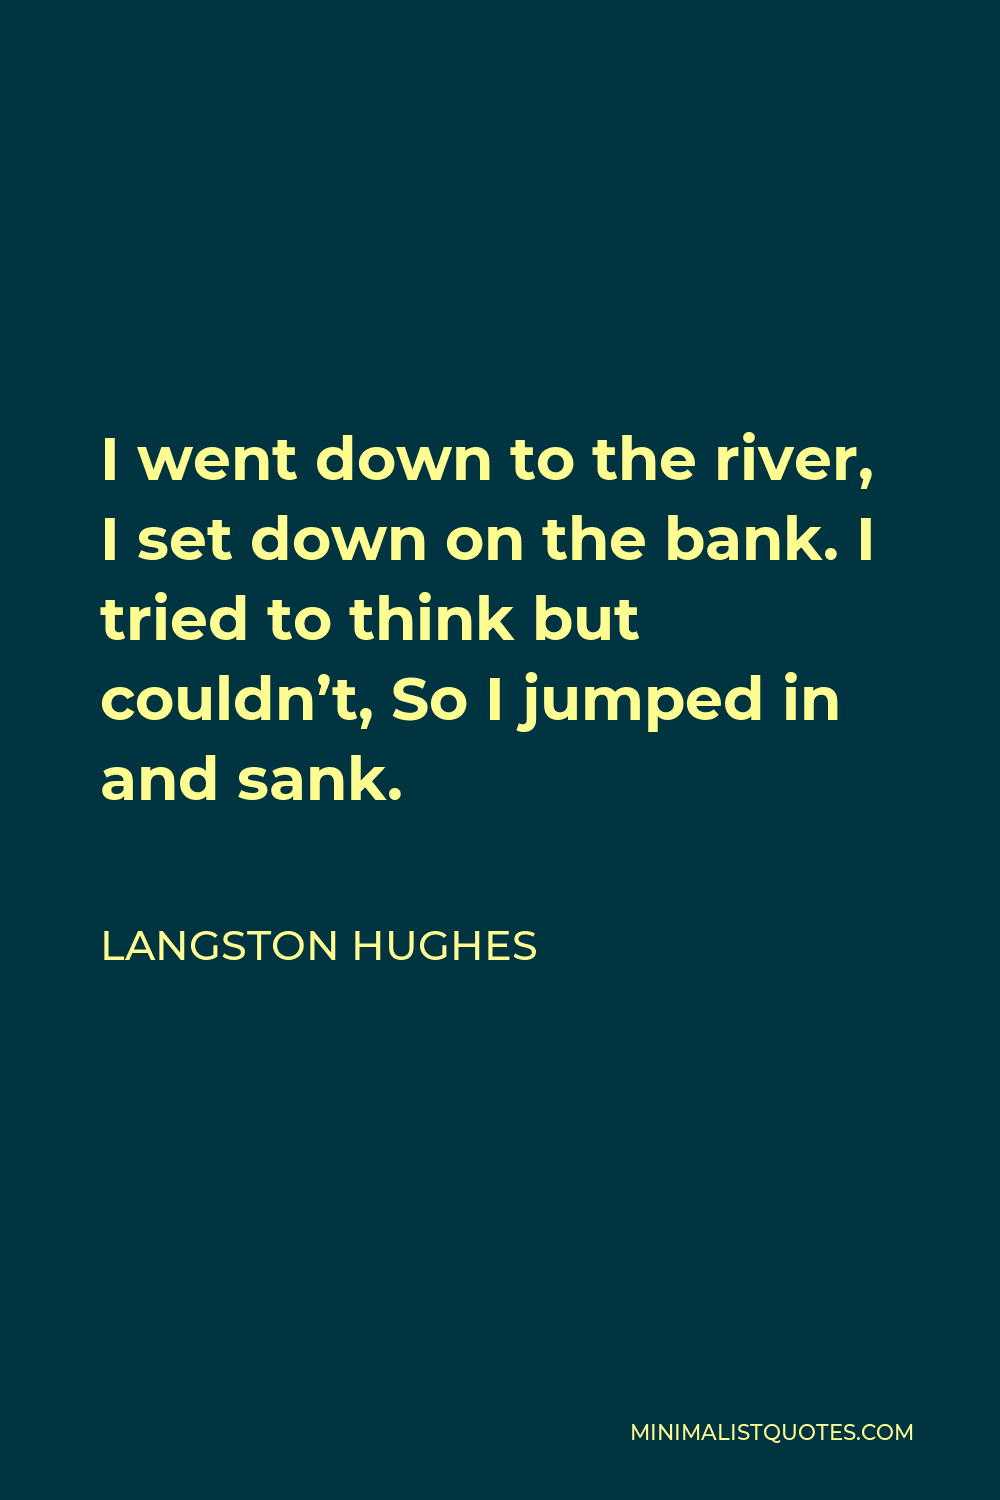 Langston Hughes Quote - I went down to the river, I set down on the bank. I tried to think but couldn’t, So I jumped in and sank.